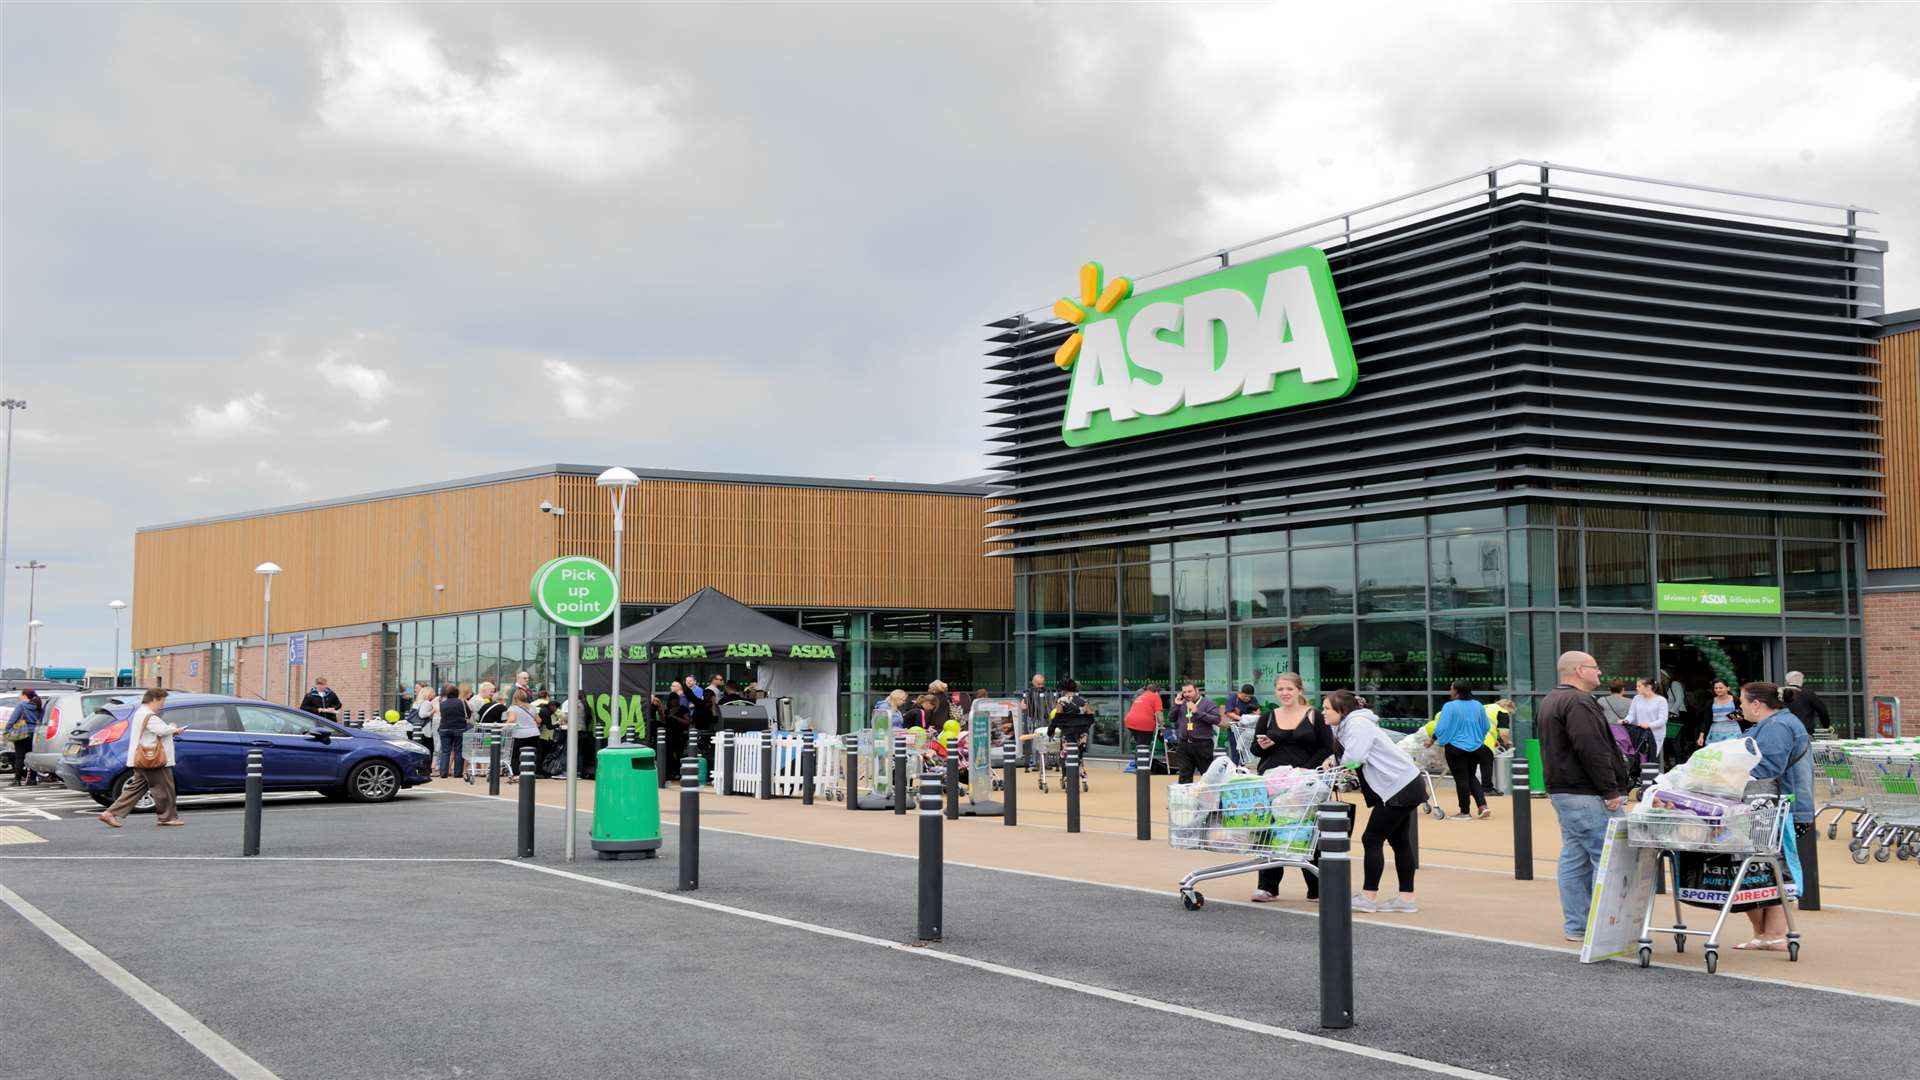 People will soon be able to get the bus to Asda in Gillingham.